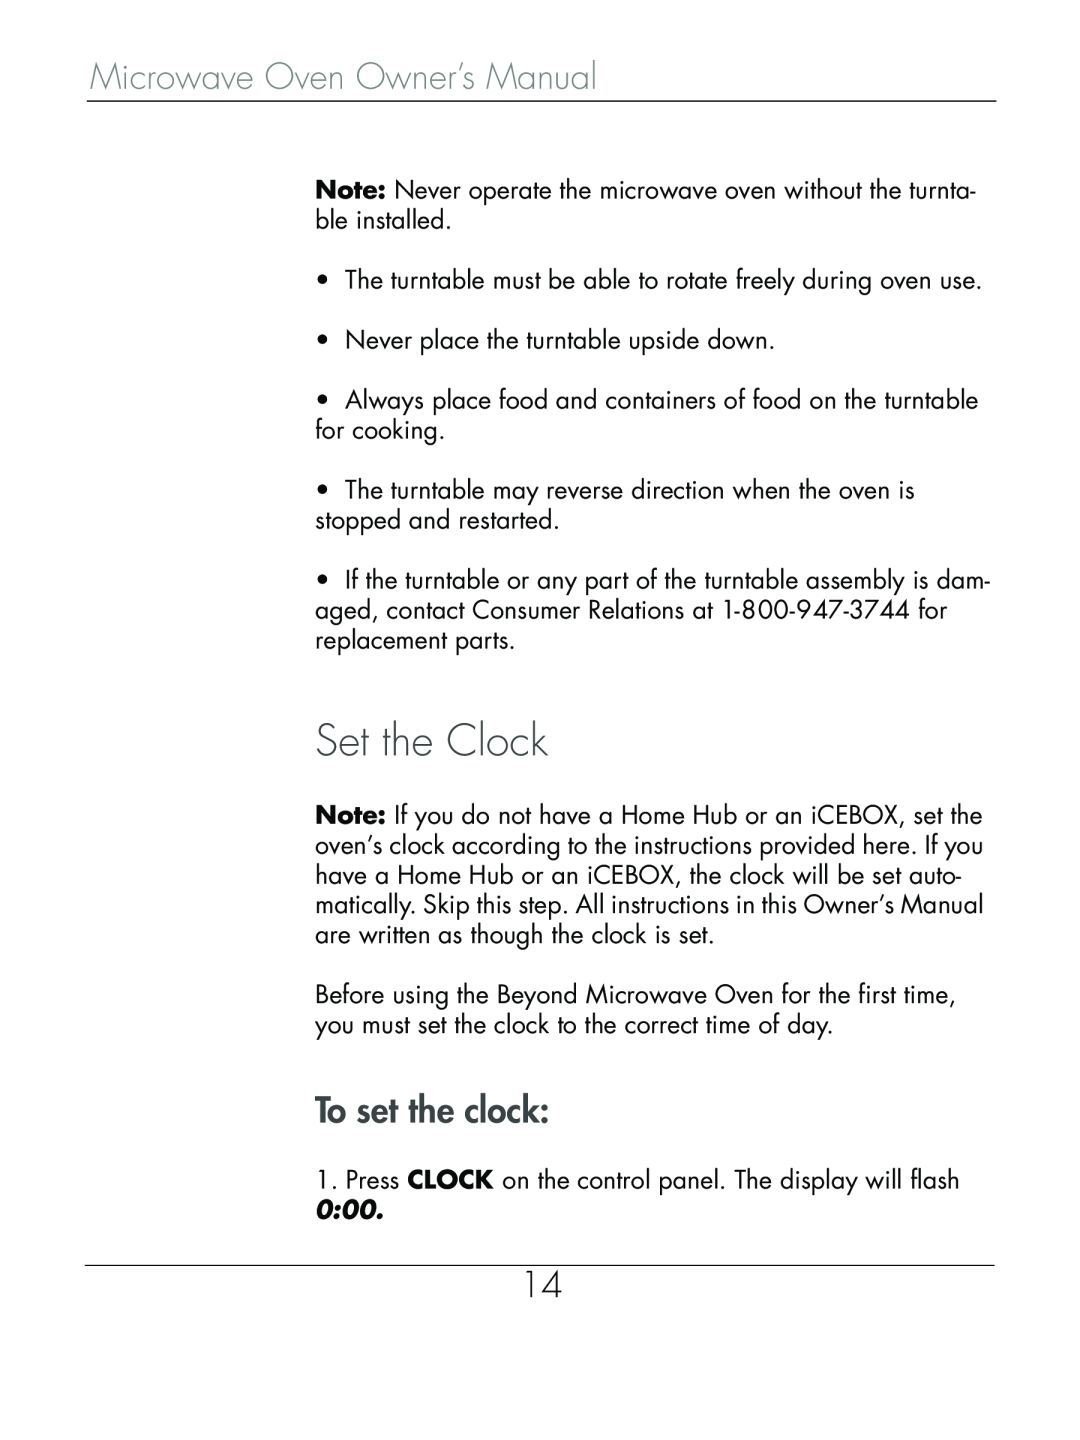 Beyond Microwace Oven manual Set the Clock, To set the clock 